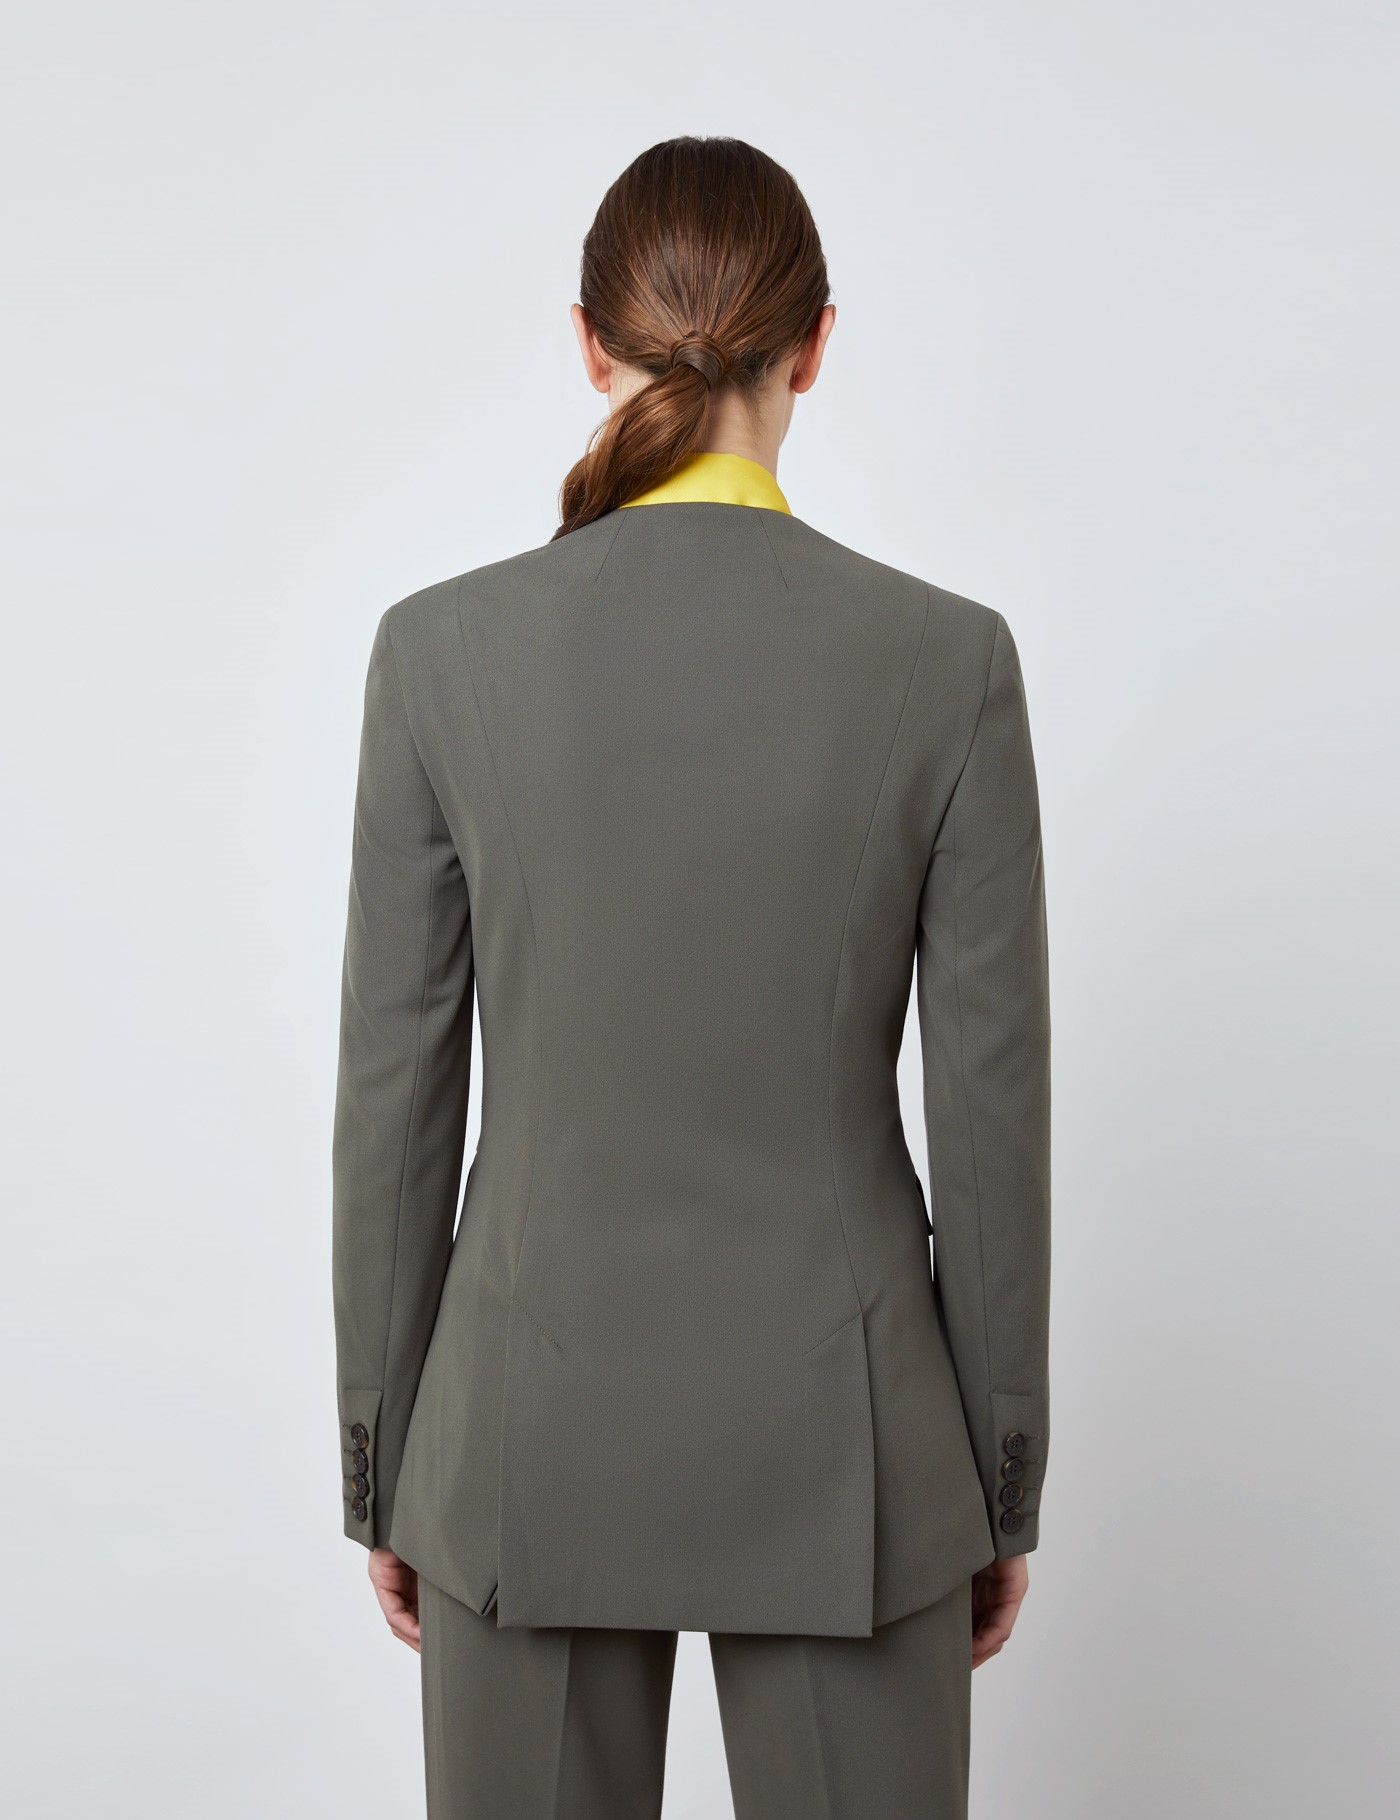 Women's Olive Slim Fit Collarless Suit Jacket | Workwear | Suits ...